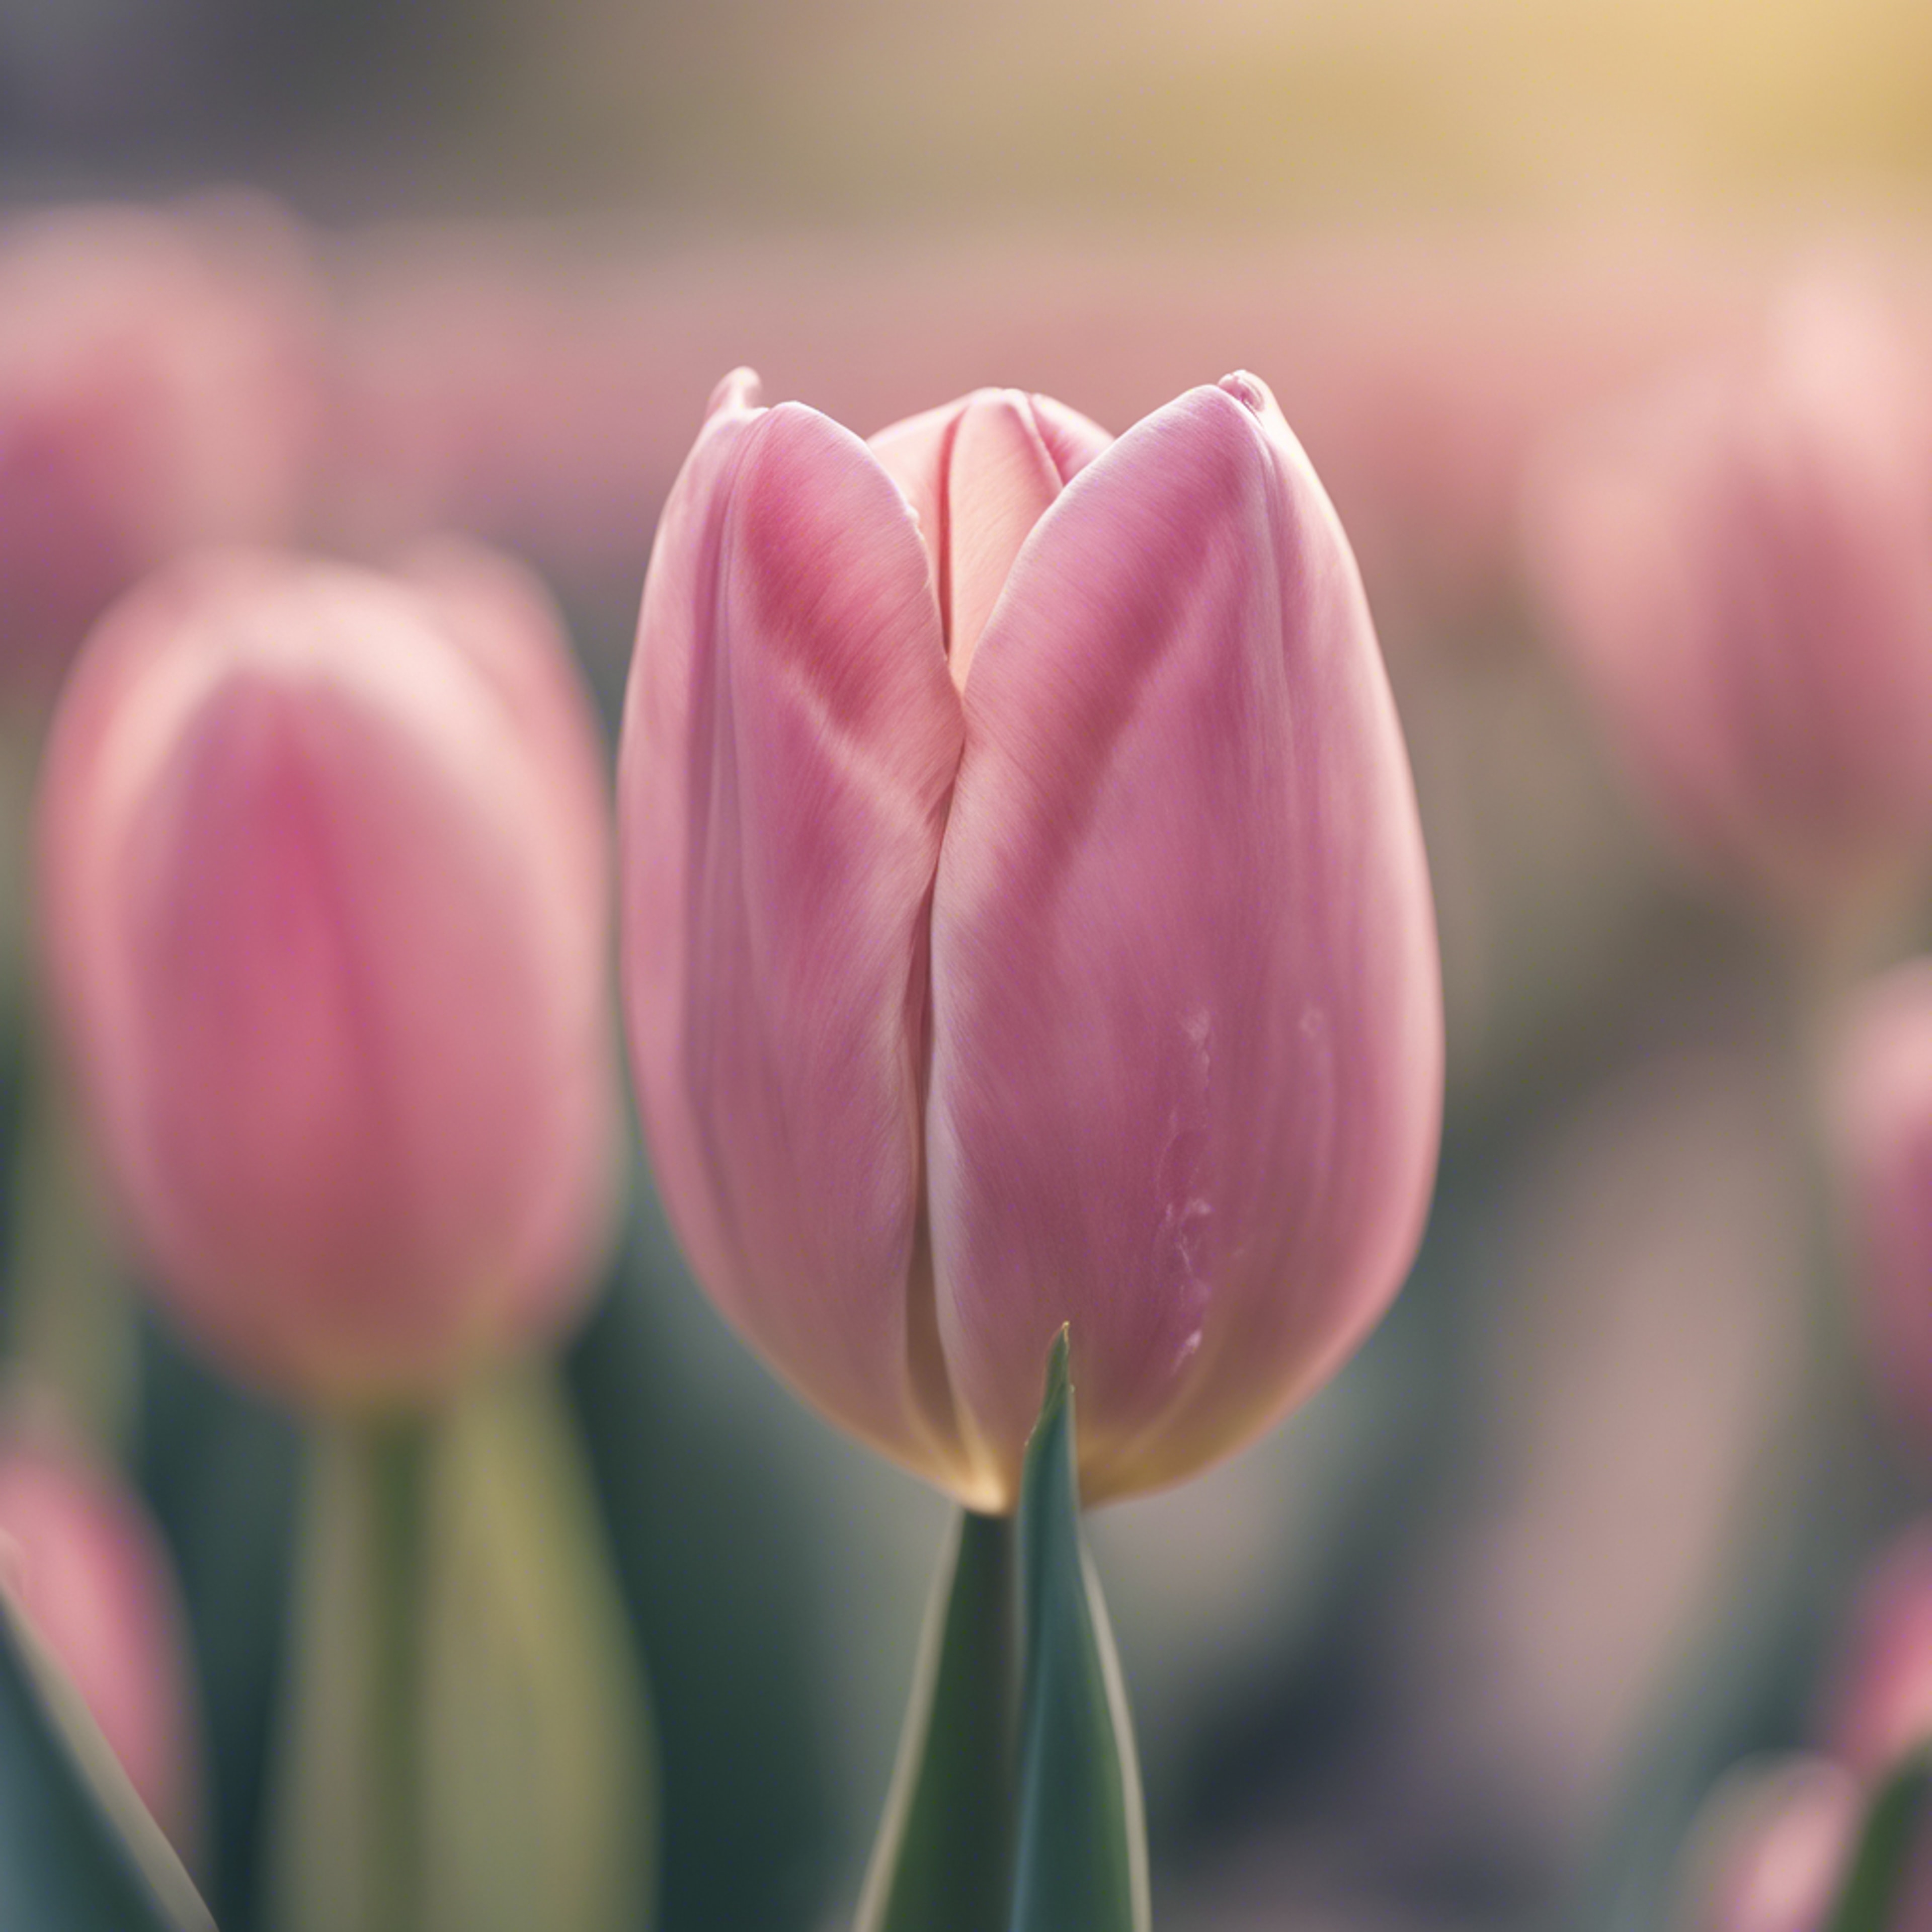 A close-up of a lone pink tulip against a soft and blurry pastel background壁紙[4132f8cb968043e28bd5]